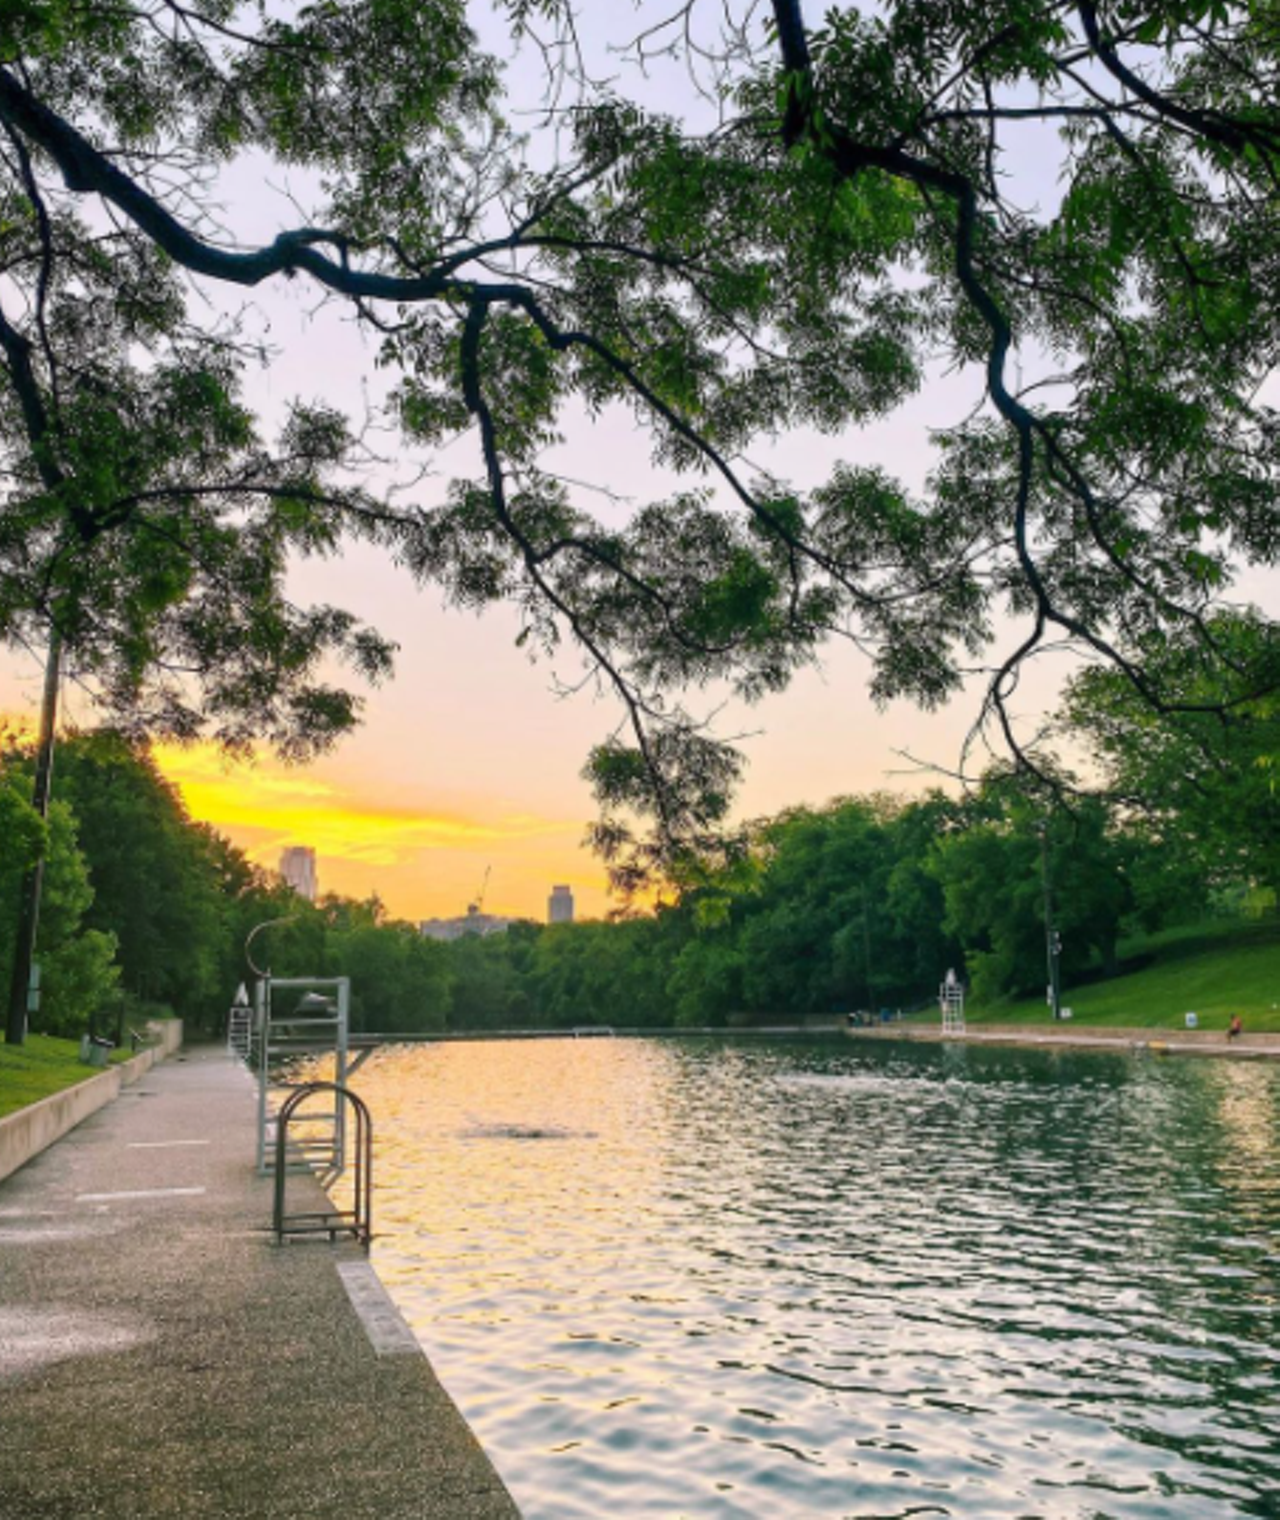 Barton Springs
2131 William Barton Drive, Austin, (512) 974-6300, austintexas.gov
Nestled in central Austin’s Zilker Park, the home of ACL, Barton Springs’ 68-70 degrees springwater makes for a great stop to cool off during a day of exploring the live music capital. As a federally-protected habitat to the endangered Barton Springs Salamander, the pool is closed on Thursdays for cleaning. Admission payment is currently online only, so leave the cash at home.
Photo via Instagram / qua.run.tine